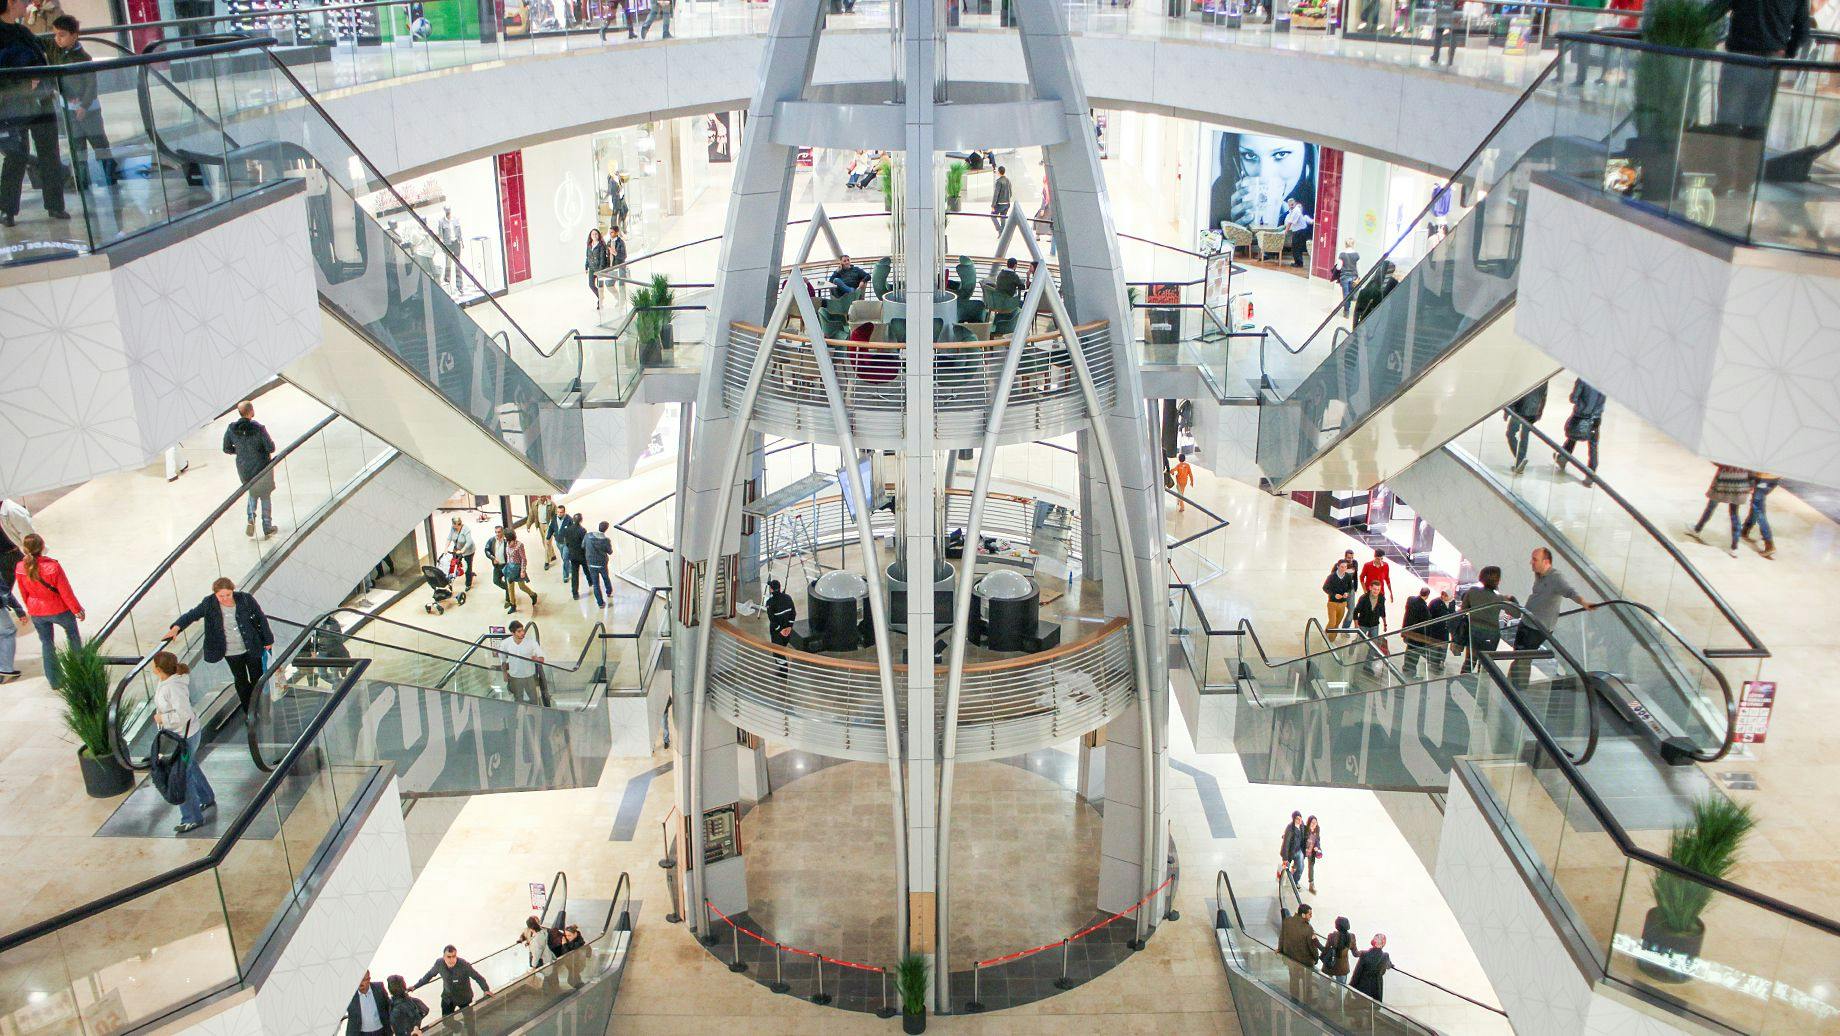 View of the installation in a shopping center in Istanbul